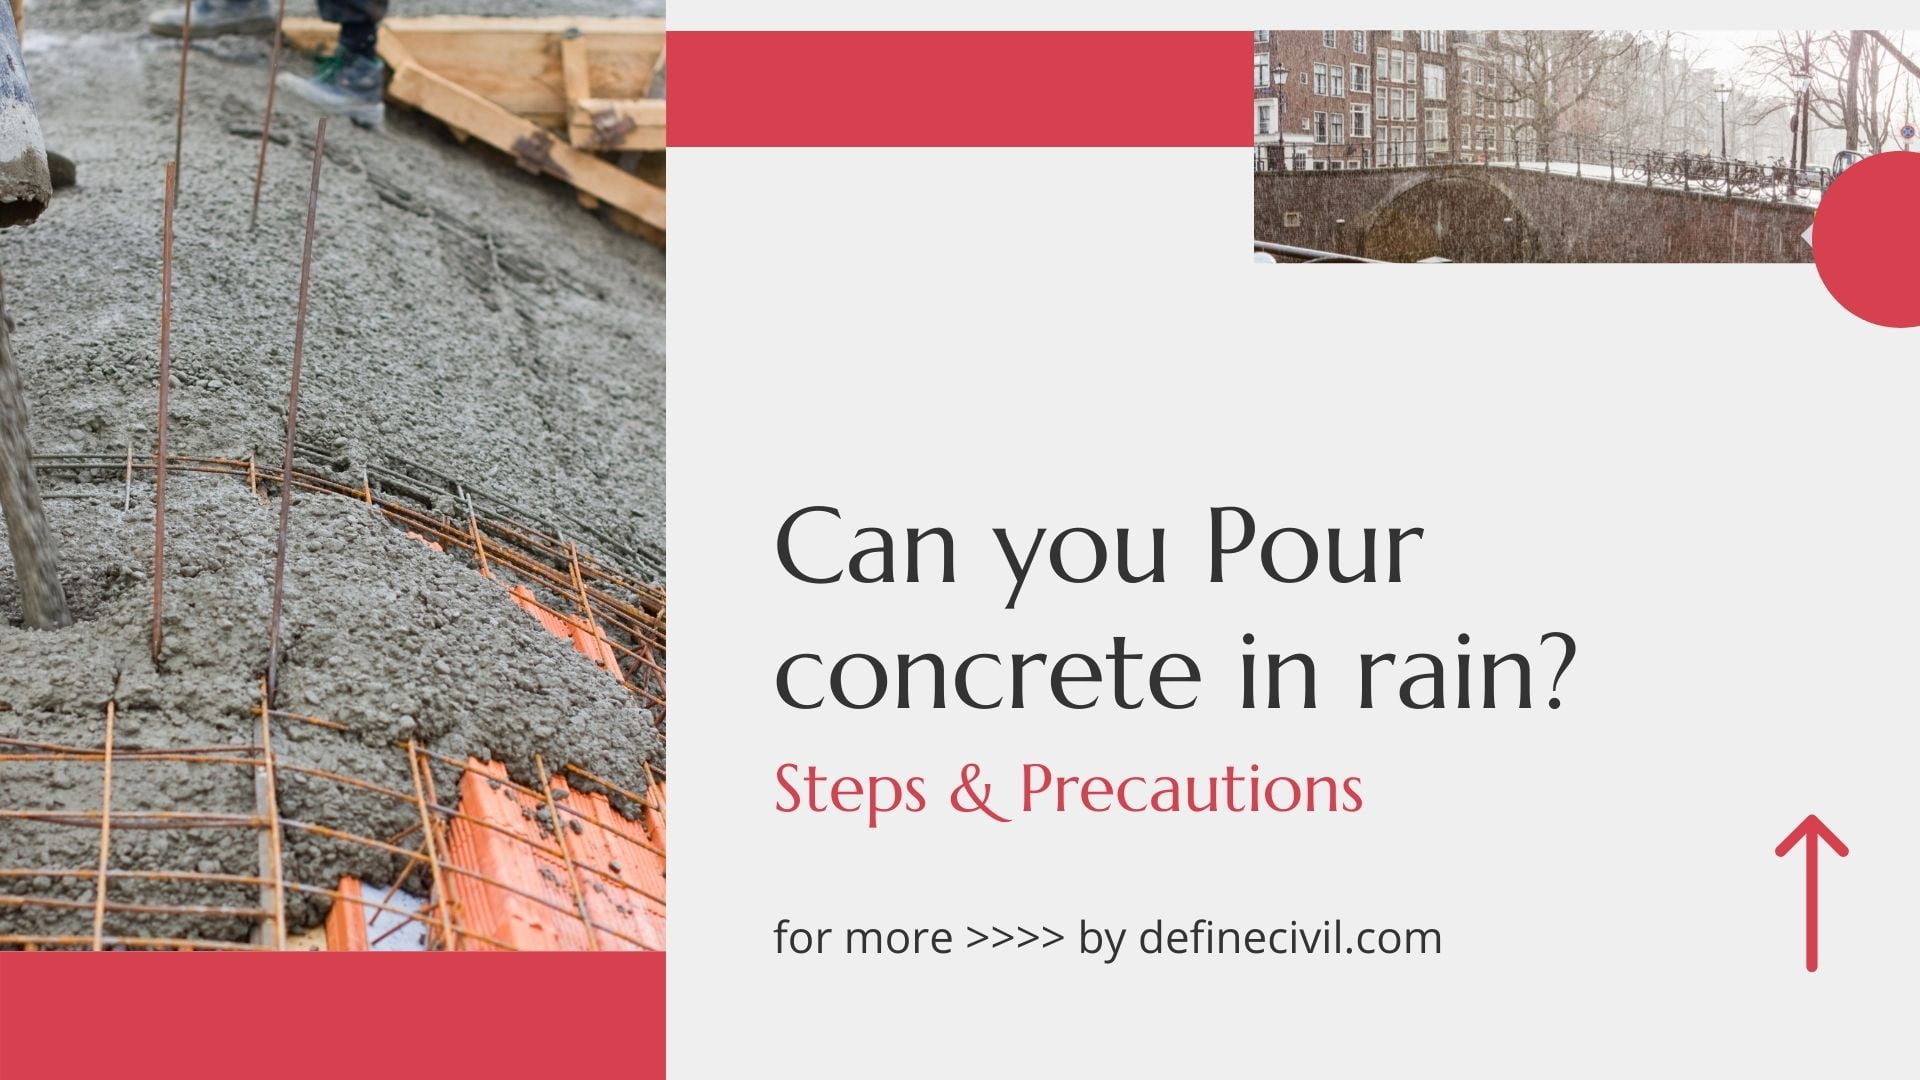 Can You Pour Concrete in rain? Steps and precautions